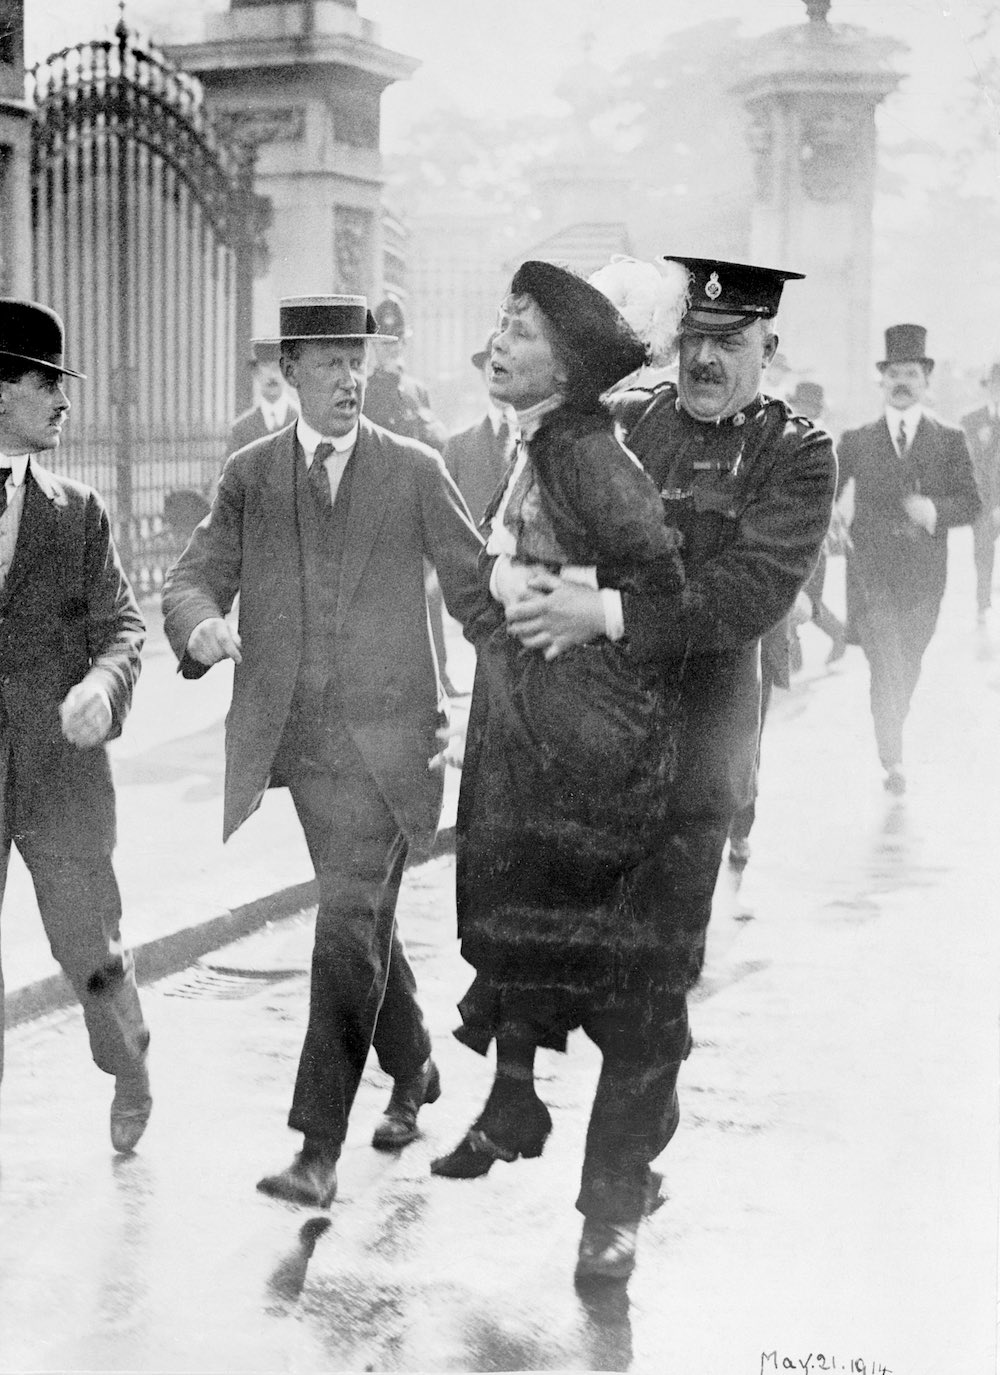 Suffragettes march on Buckingham Palace